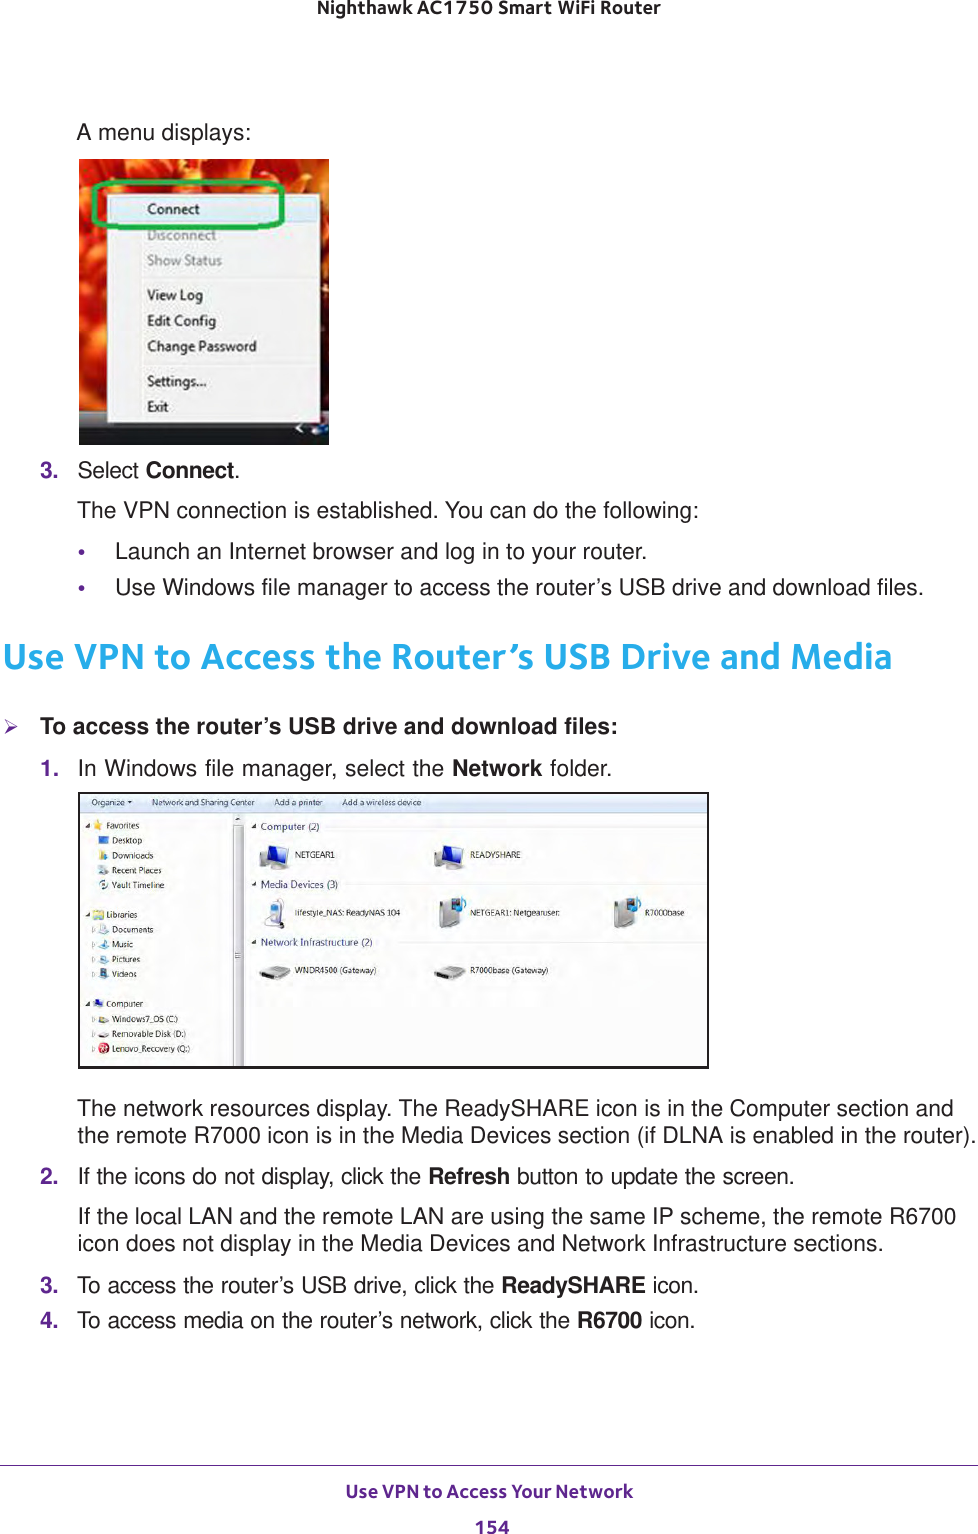 Use VPN to Access Your Network 154Nighthawk AC1750 Smart WiFi Router A menu displays:3.  Select Connect.The VPN connection is established. You can do the following:•Launch an Internet browser and log in to your router.•Use Windows file manager to access the router’s USB drive and download files.Use VPN to Access the Router’s USB Drive and MediaTo access the router’s USB drive and download files:1.  In Windows file manager, select the Network folder.The network resources display. The ReadySHARE icon is in the Computer section and the remote R7000 icon is in the Media Devices section (if DLNA is enabled in the router).2.  If the icons do not display, click the Refresh button to update the screen.If the local LAN and the remote LAN are using the same IP scheme, the remote R6700 icon does not display in the Media Devices and Network Infrastructure sections.3.  To access the router’s USB drive, click the ReadySHARE icon.4.  To access media on the router’s network, click the R6700 icon.